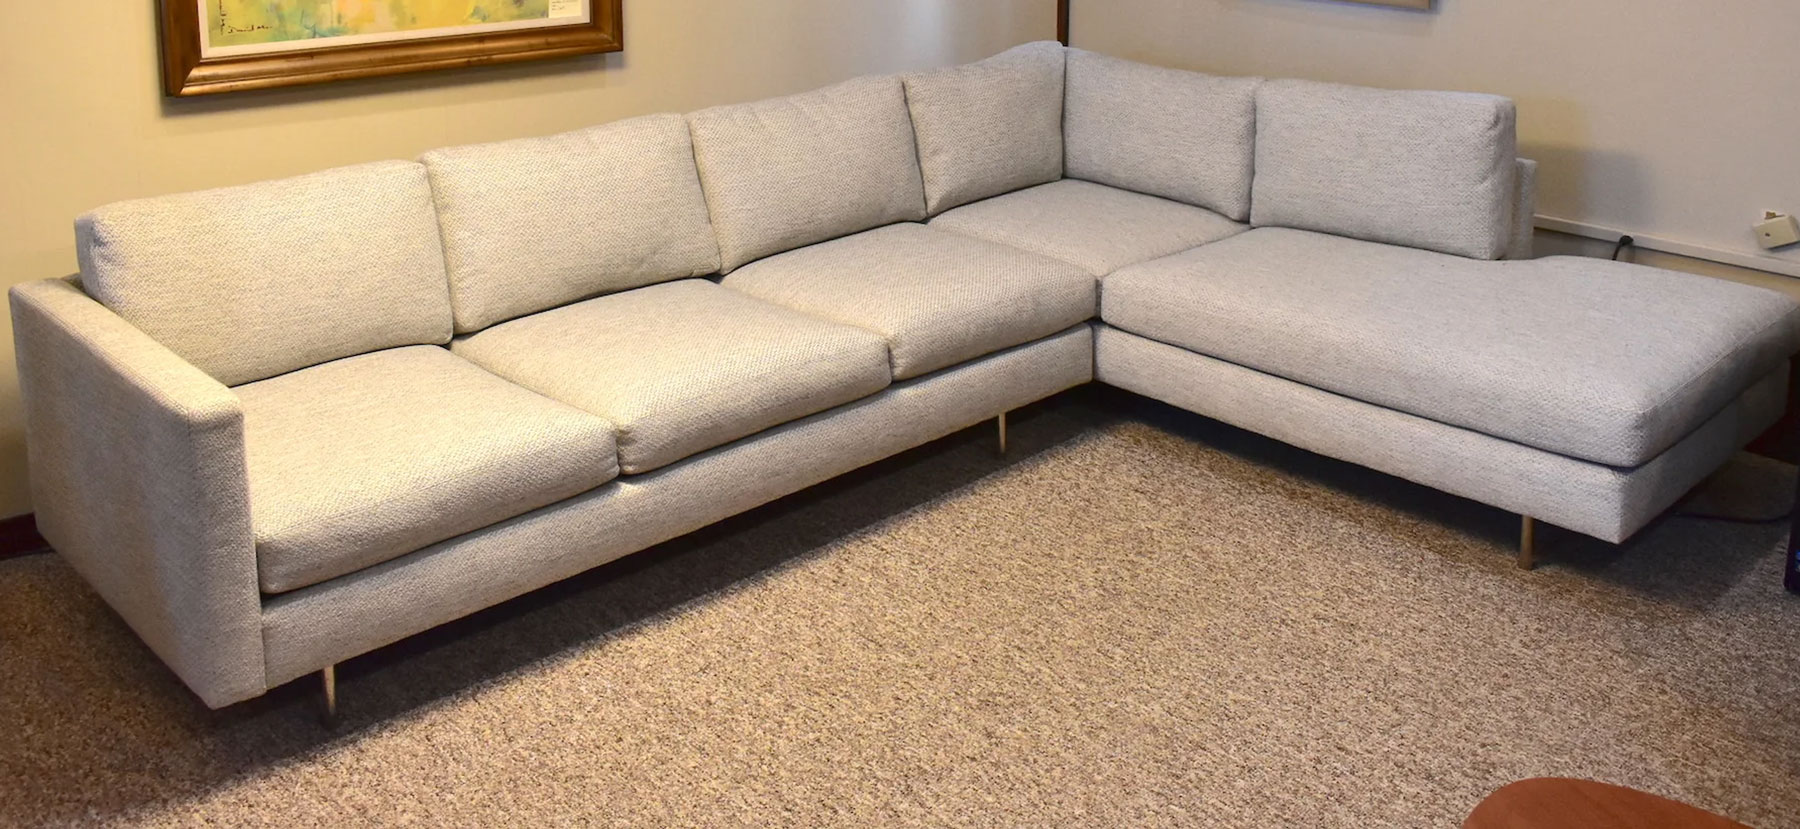 Thayer Coggin 855 Design Classic Sectional in 1778-21 Fabric with Stainless Legs